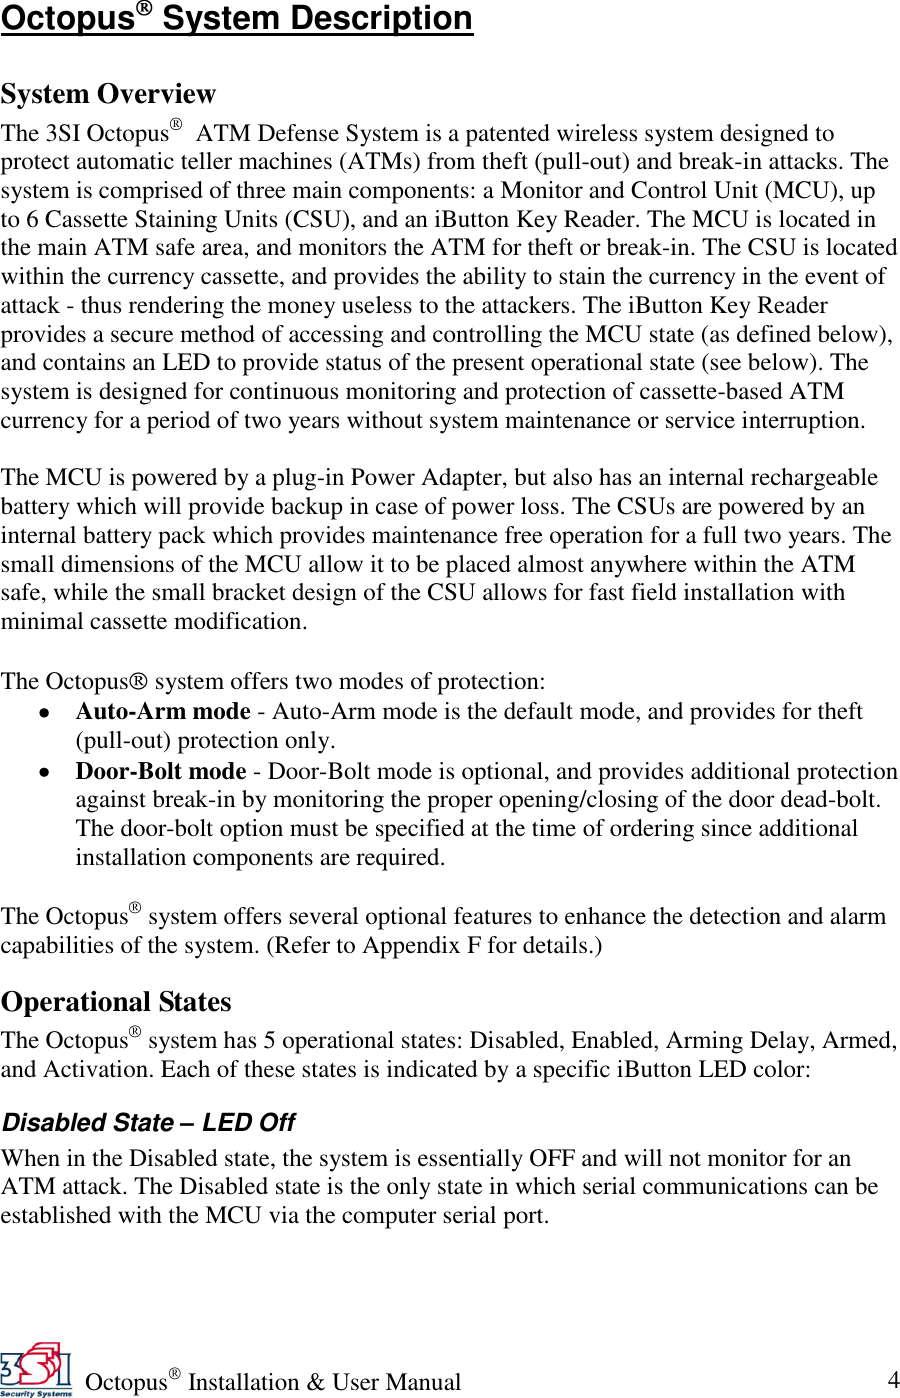   Octopus  Installation &amp; User Manual 4 Octopus  System Description  System Overview The 3SI Octopus   ATM Defense System is a patented wireless system designed to protect automatic teller machines (ATMs) from theft (pull-out) and break-in attacks. The system is comprised of three main components: a Monitor and Control Unit (MCU), up to 6 Cassette Staining Units (CSU), and an iButton Key Reader. The MCU is located in the main ATM safe area, and monitors the ATM for theft or break-in. The CSU is located within the currency cassette, and provides the ability to stain the currency in the event of attack - thus rendering the money useless to the attackers. The iButton Key Reader provides a secure method of accessing and controlling the MCU state (as defined below), and contains an LED to provide status of the present operational state (see below). The system is designed for continuous monitoring and protection of cassette-based ATM currency for a period of two years without system maintenance or service interruption.   The MCU is powered by a plug-in Power Adapter, but also has an internal rechargeable battery which will provide backup in case of power loss. The CSUs are powered by an internal battery pack which provides maintenance free operation for a full two years. The small dimensions of the MCU allow it to be placed almost anywhere within the ATM safe, while the small bracket design of the CSU allows for fast field installation with minimal cassette modification.  The Octopus  system offers two modes of protection:  Auto-Arm mode - Auto-Arm mode is the default mode, and provides for theft (pull-out) protection only.  Door-Bolt mode - Door-Bolt mode is optional, and provides additional protection against break-in by monitoring the proper opening/closing of the door dead-bolt. The door-bolt option must be specified at the time of ordering since additional installation components are required.  The Octopus  system offers several optional features to enhance the detection and alarm capabilities of the system. (Refer to Appendix F for details.) Operational States The Octopus  system has 5 operational states: Disabled, Enabled, Arming Delay, Armed, and Activation. Each of these states is indicated by a specific iButton LED color: Disabled State – LED Off When in the Disabled state, the system is essentially OFF and will not monitor for an ATM attack. The Disabled state is the only state in which serial communications can be established with the MCU via the computer serial port. 